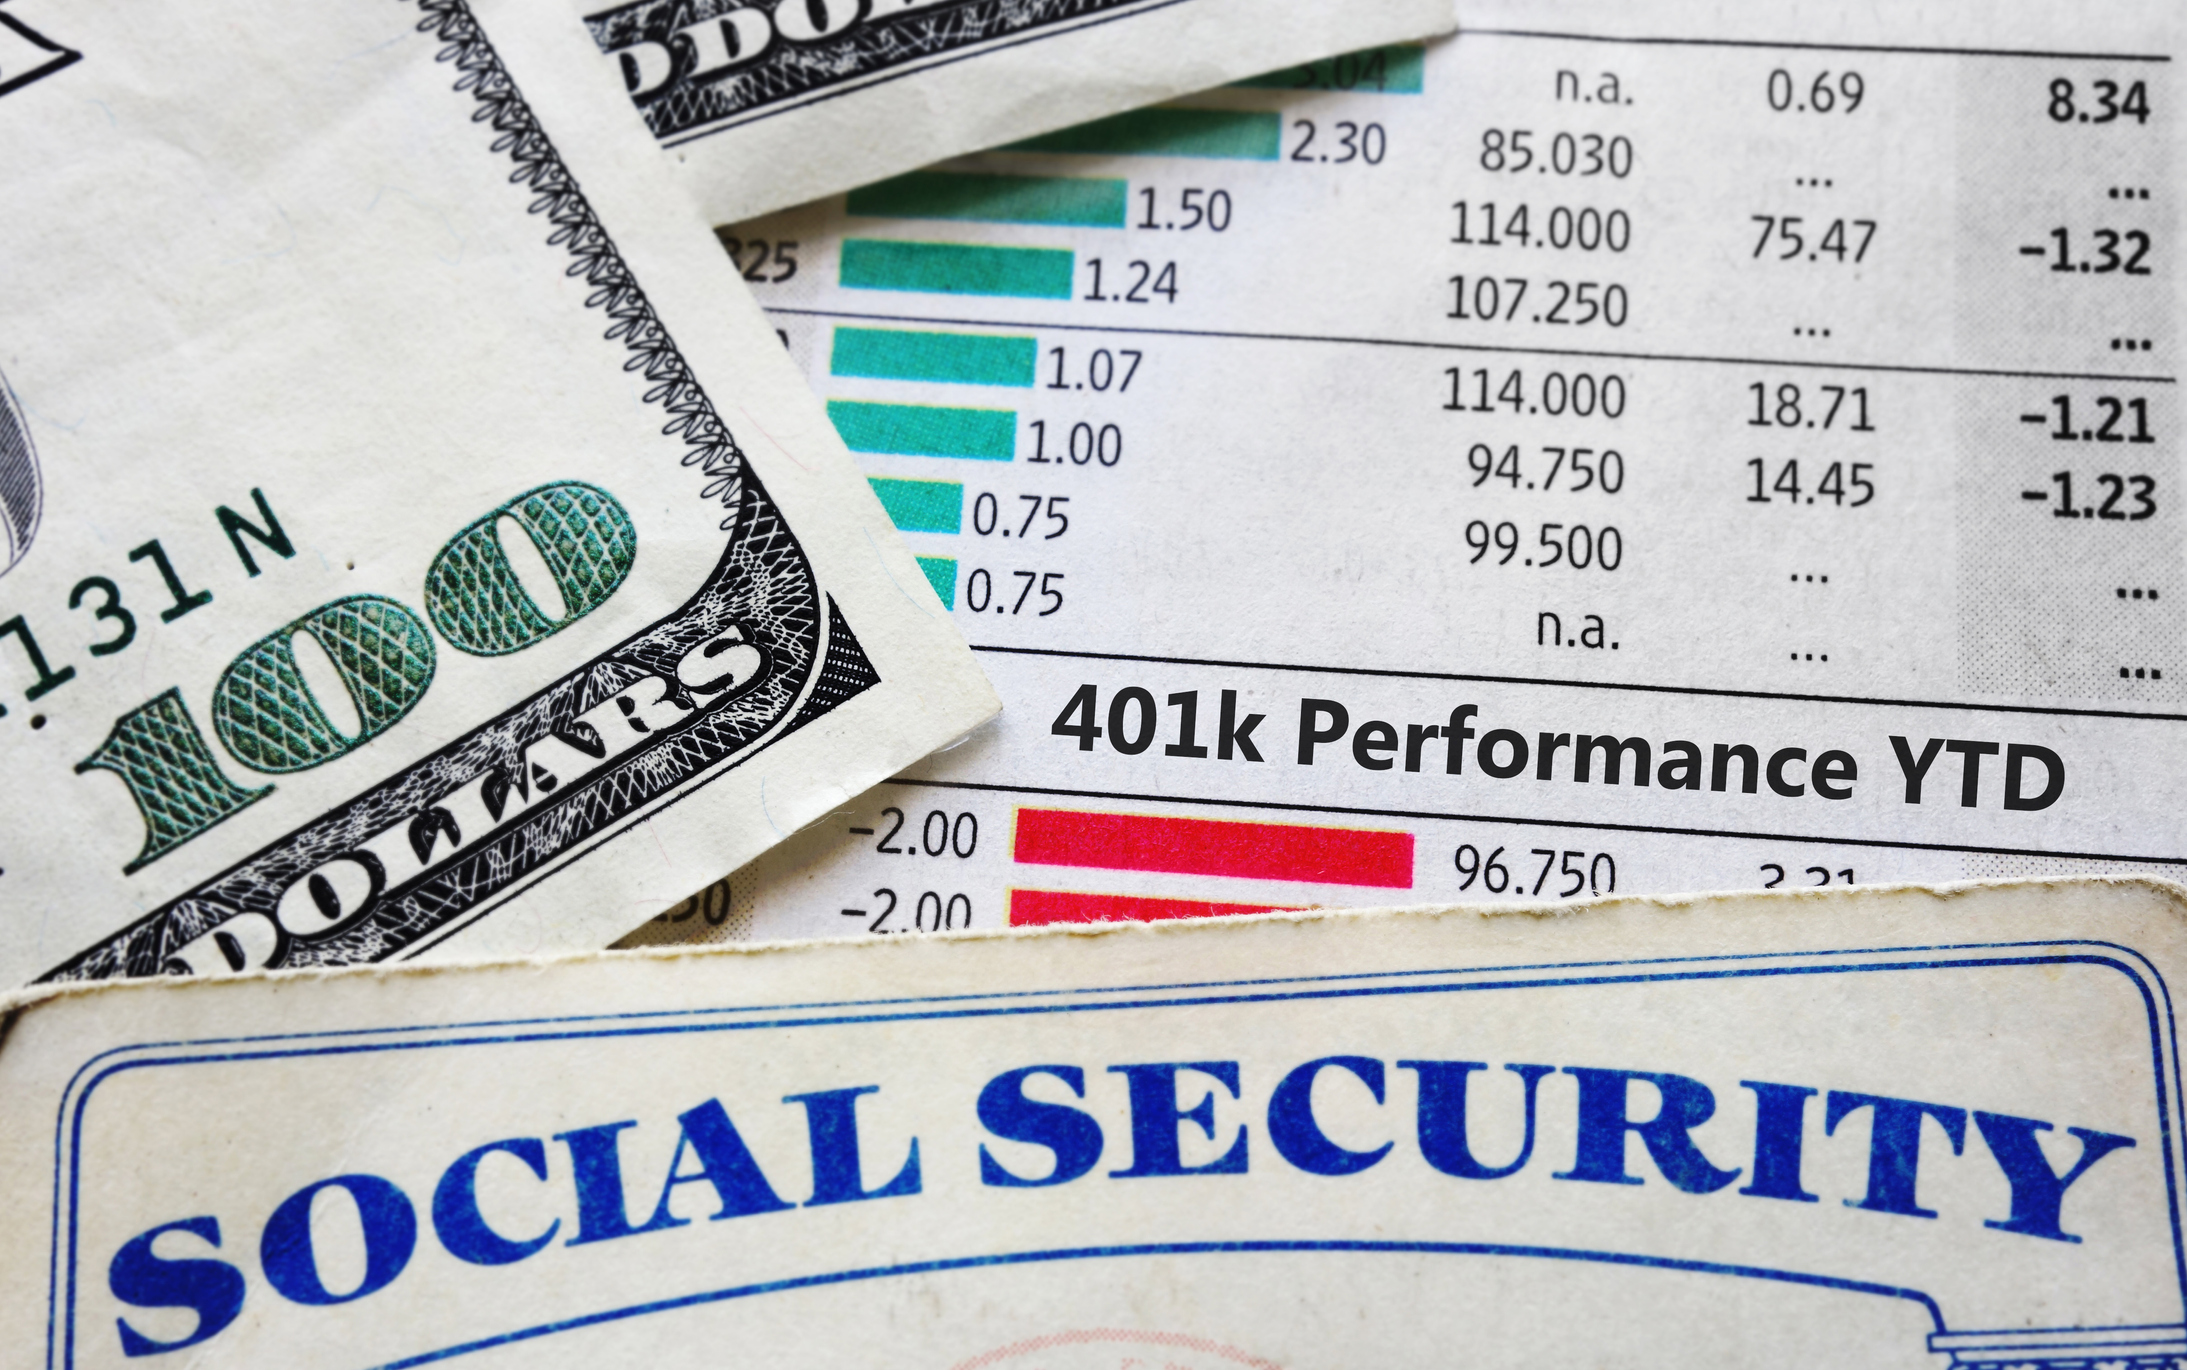 Social-Security-benefits-2nd-marriage-estate-planning-attorney-Wellesley-MA